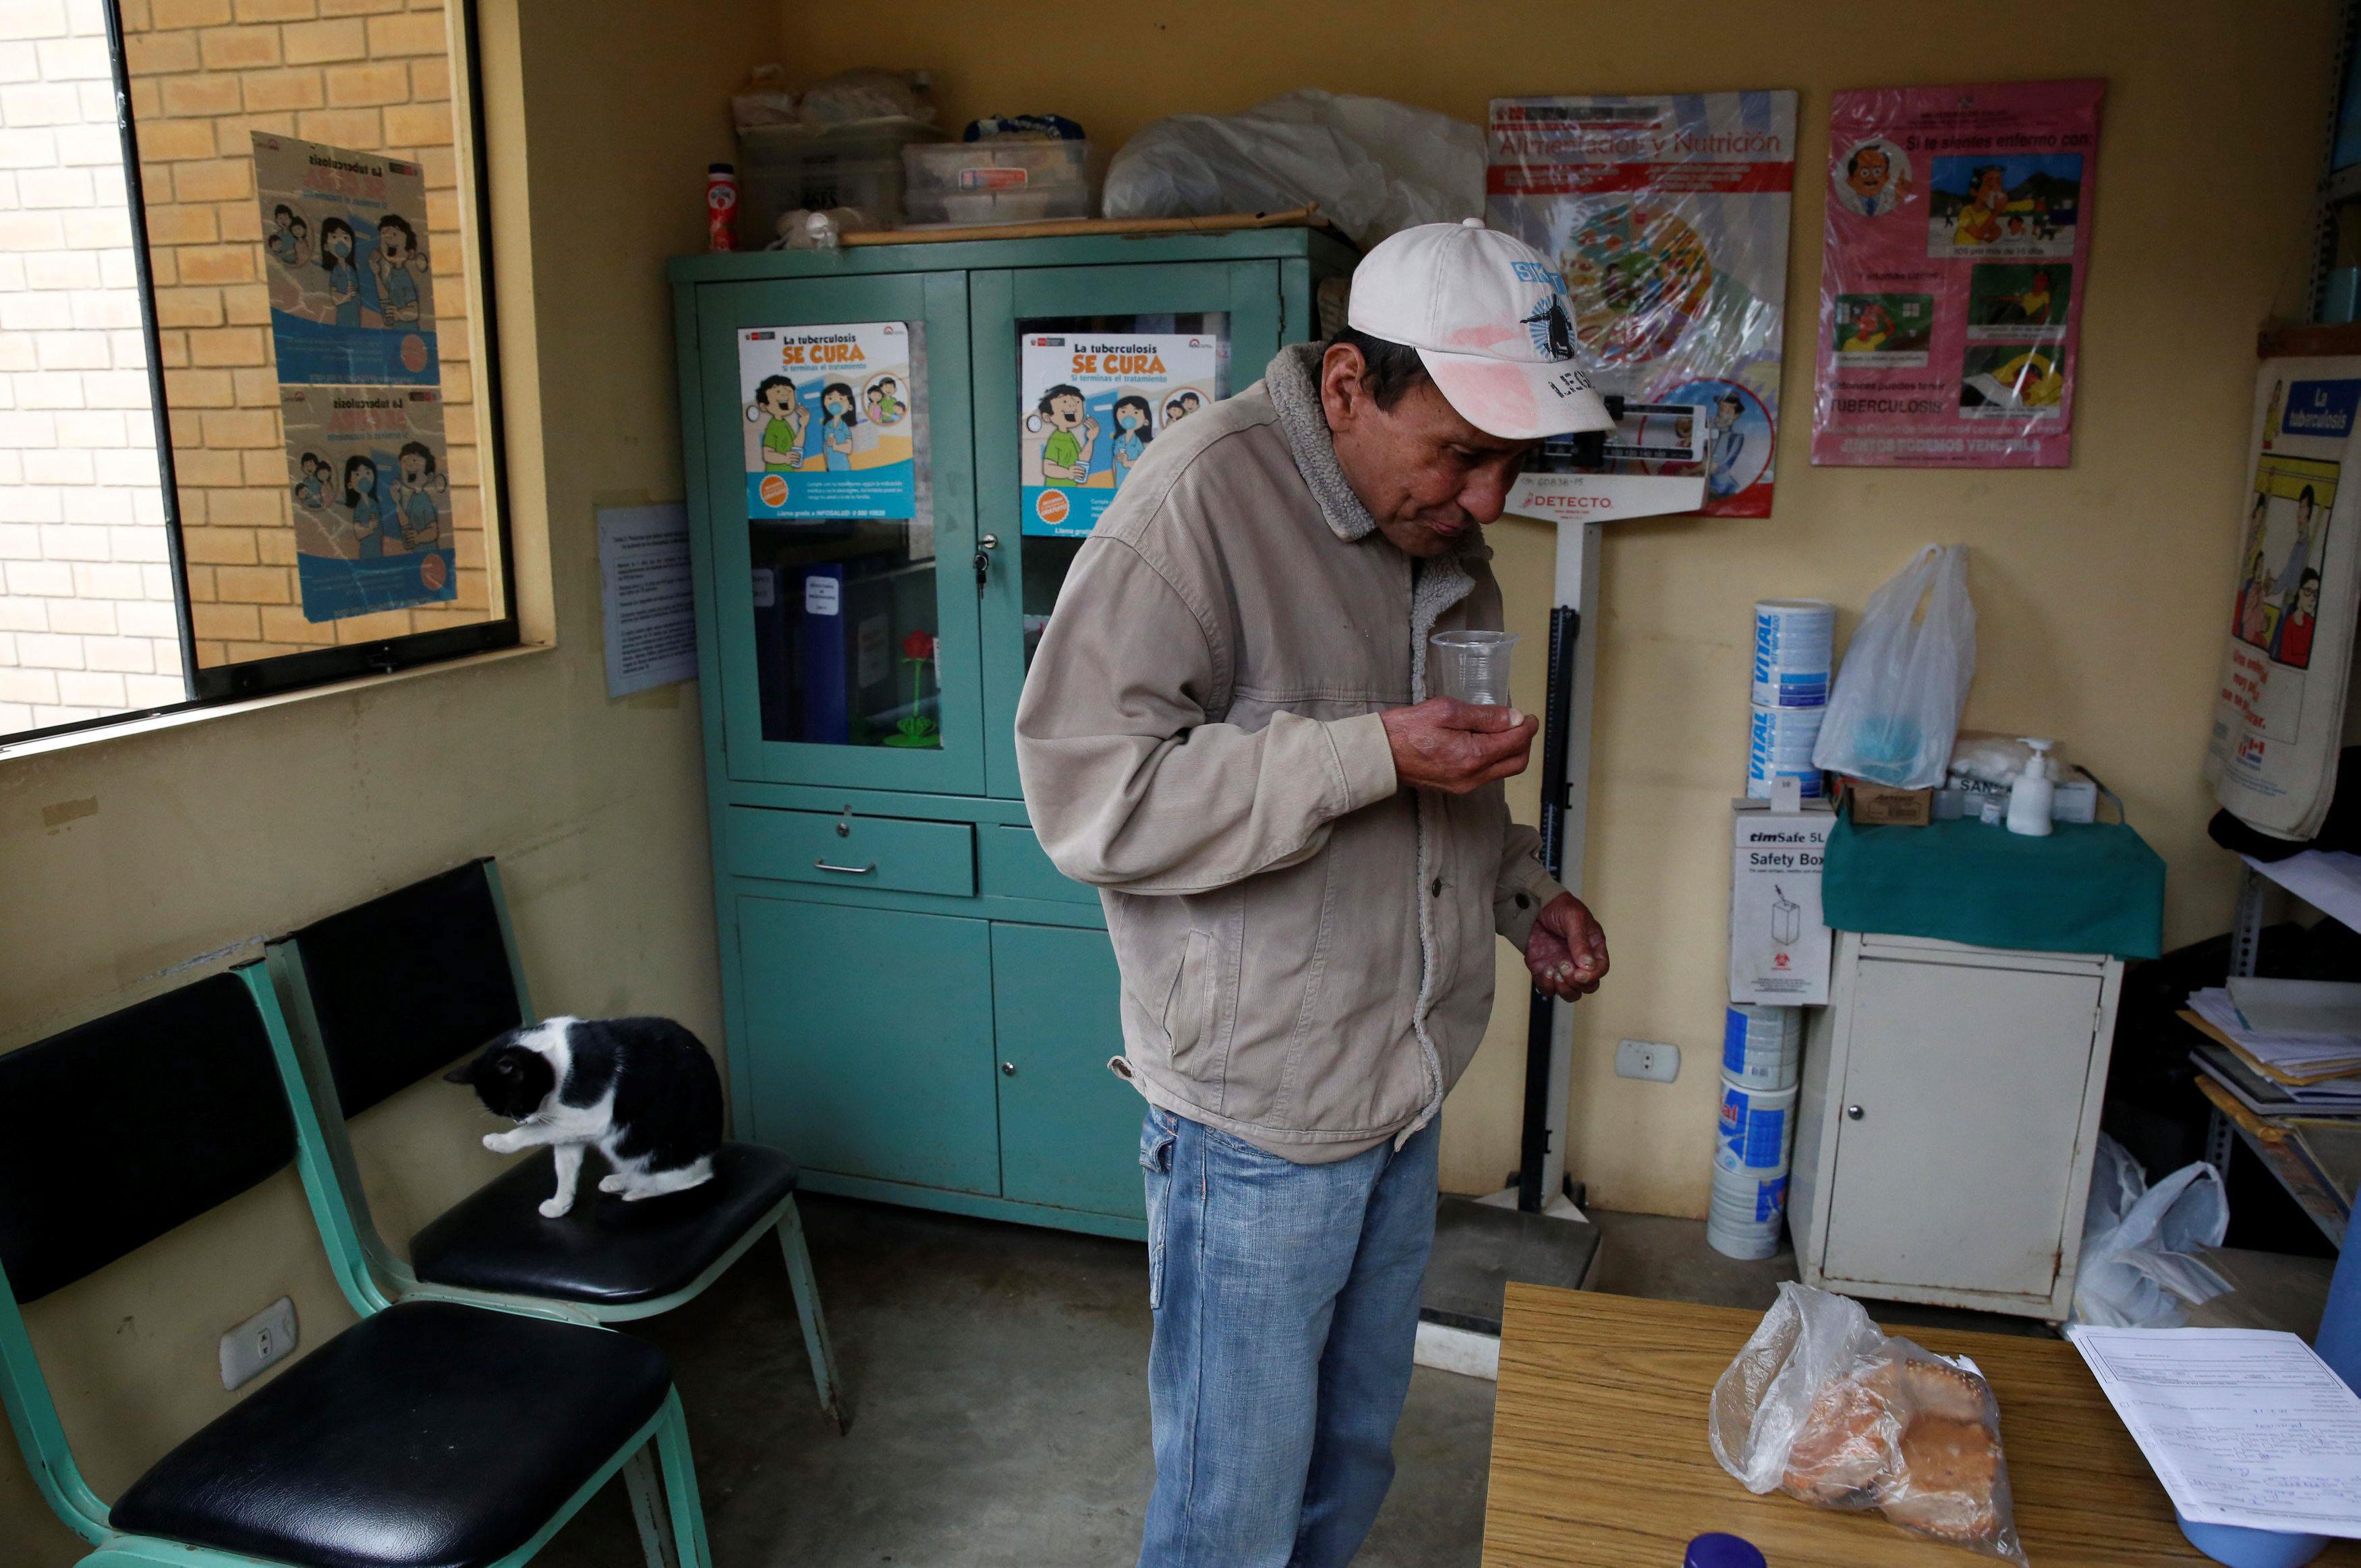 The Wider Image: Fighting tuberculosis in Peru's village of hope